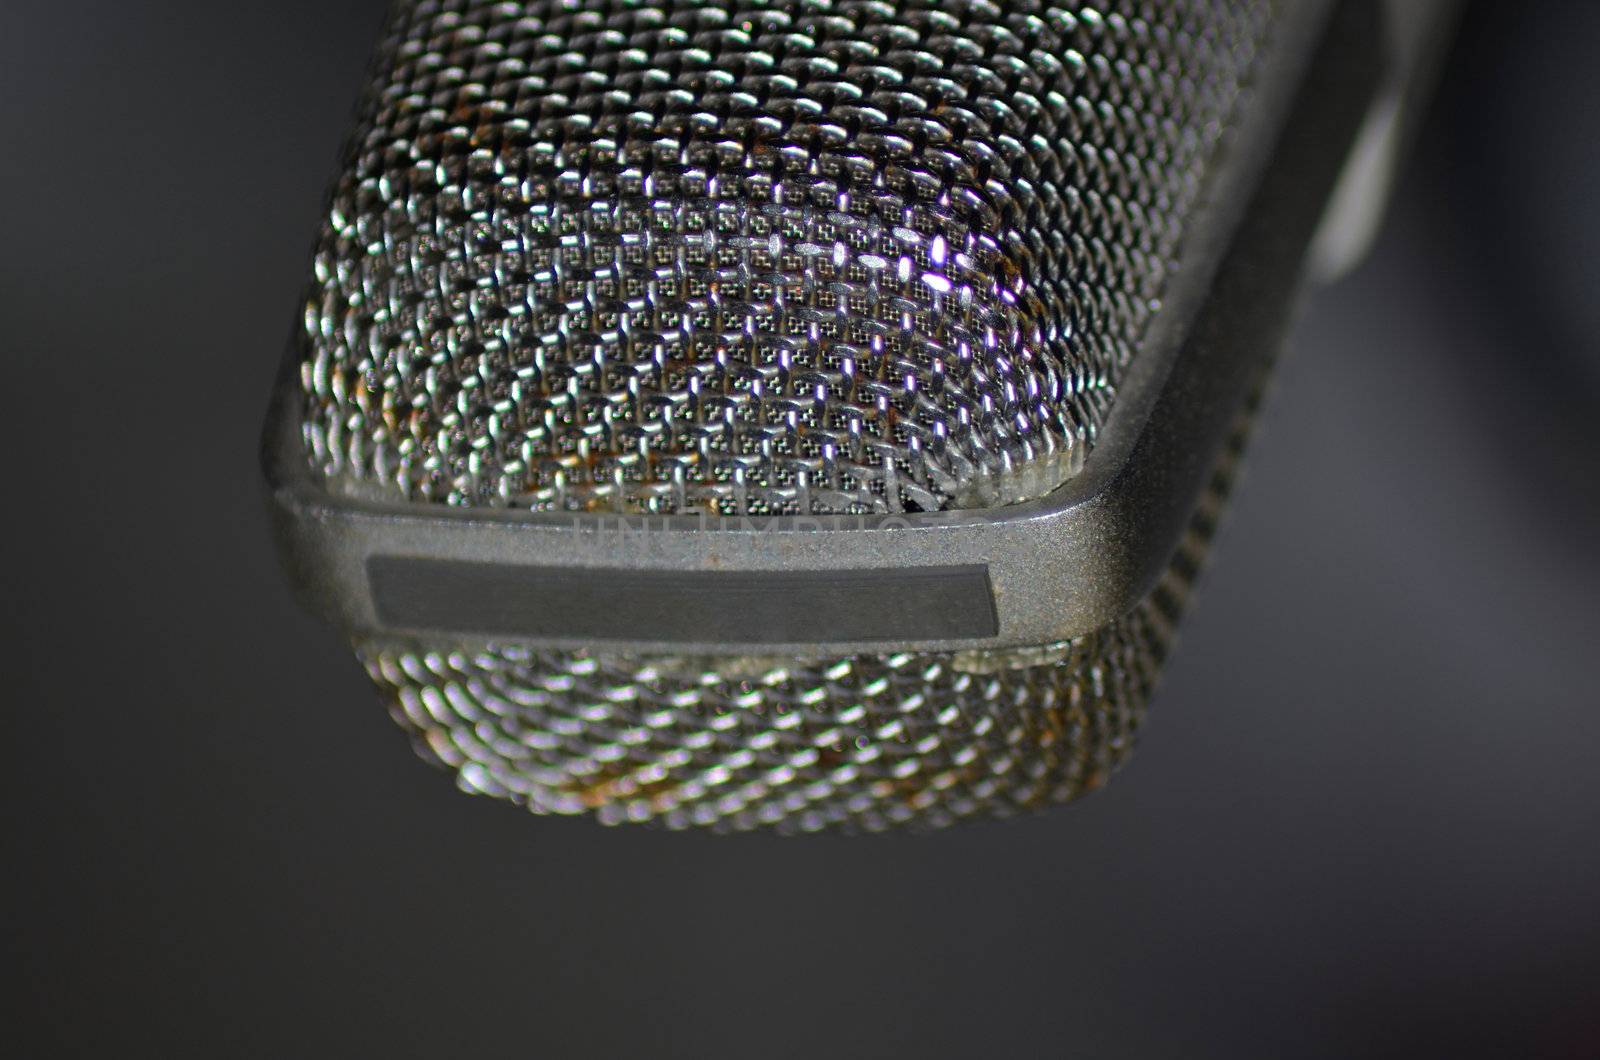 Closeup of an old microphone from the 50s